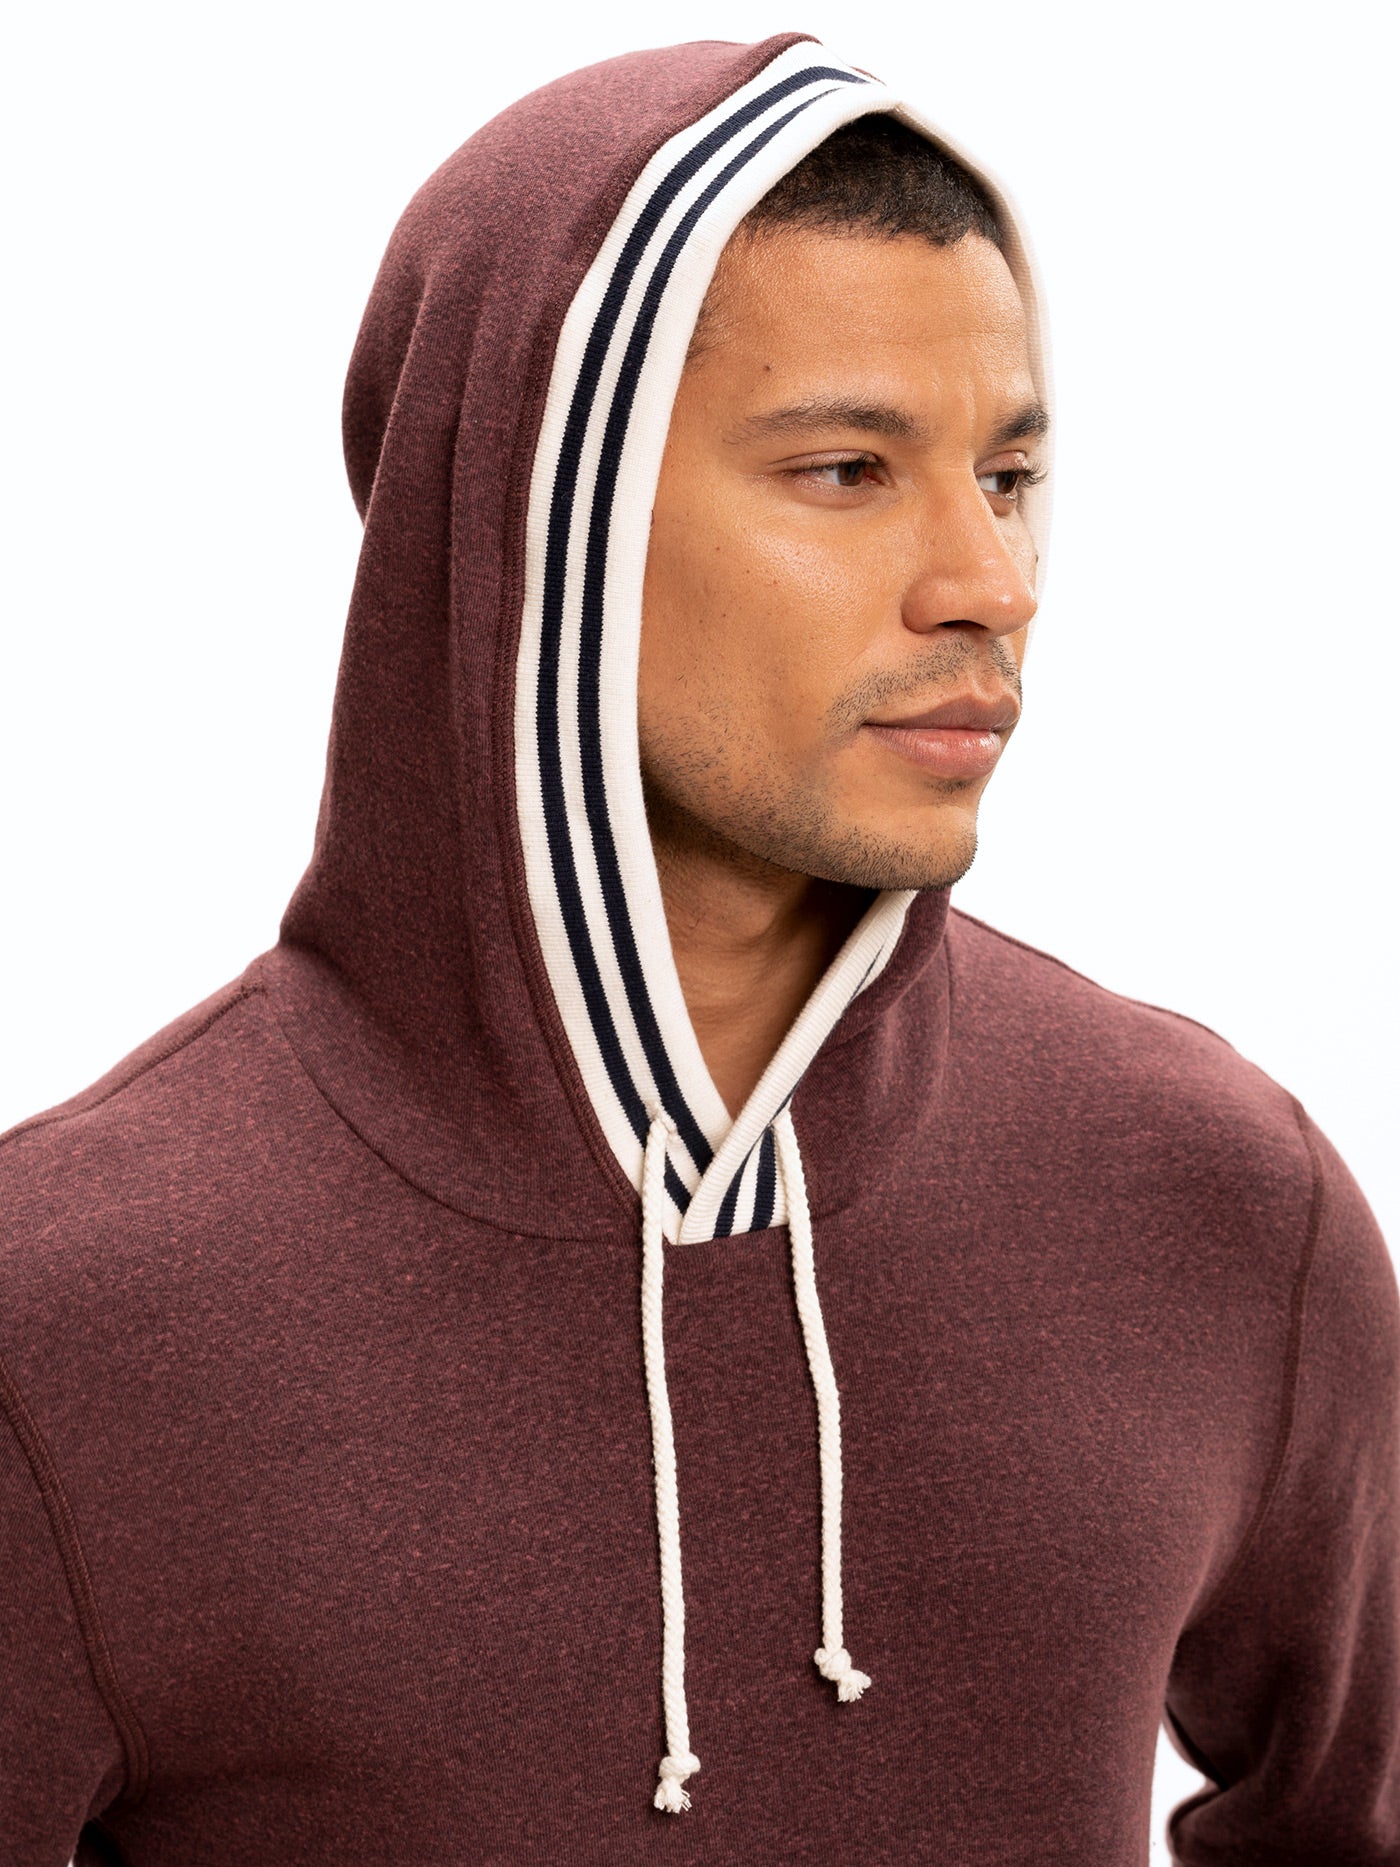 Tyson Contrast Rib Pullover Hoodie Mens Outerwear Sweatshirt Threads 4 Thought 